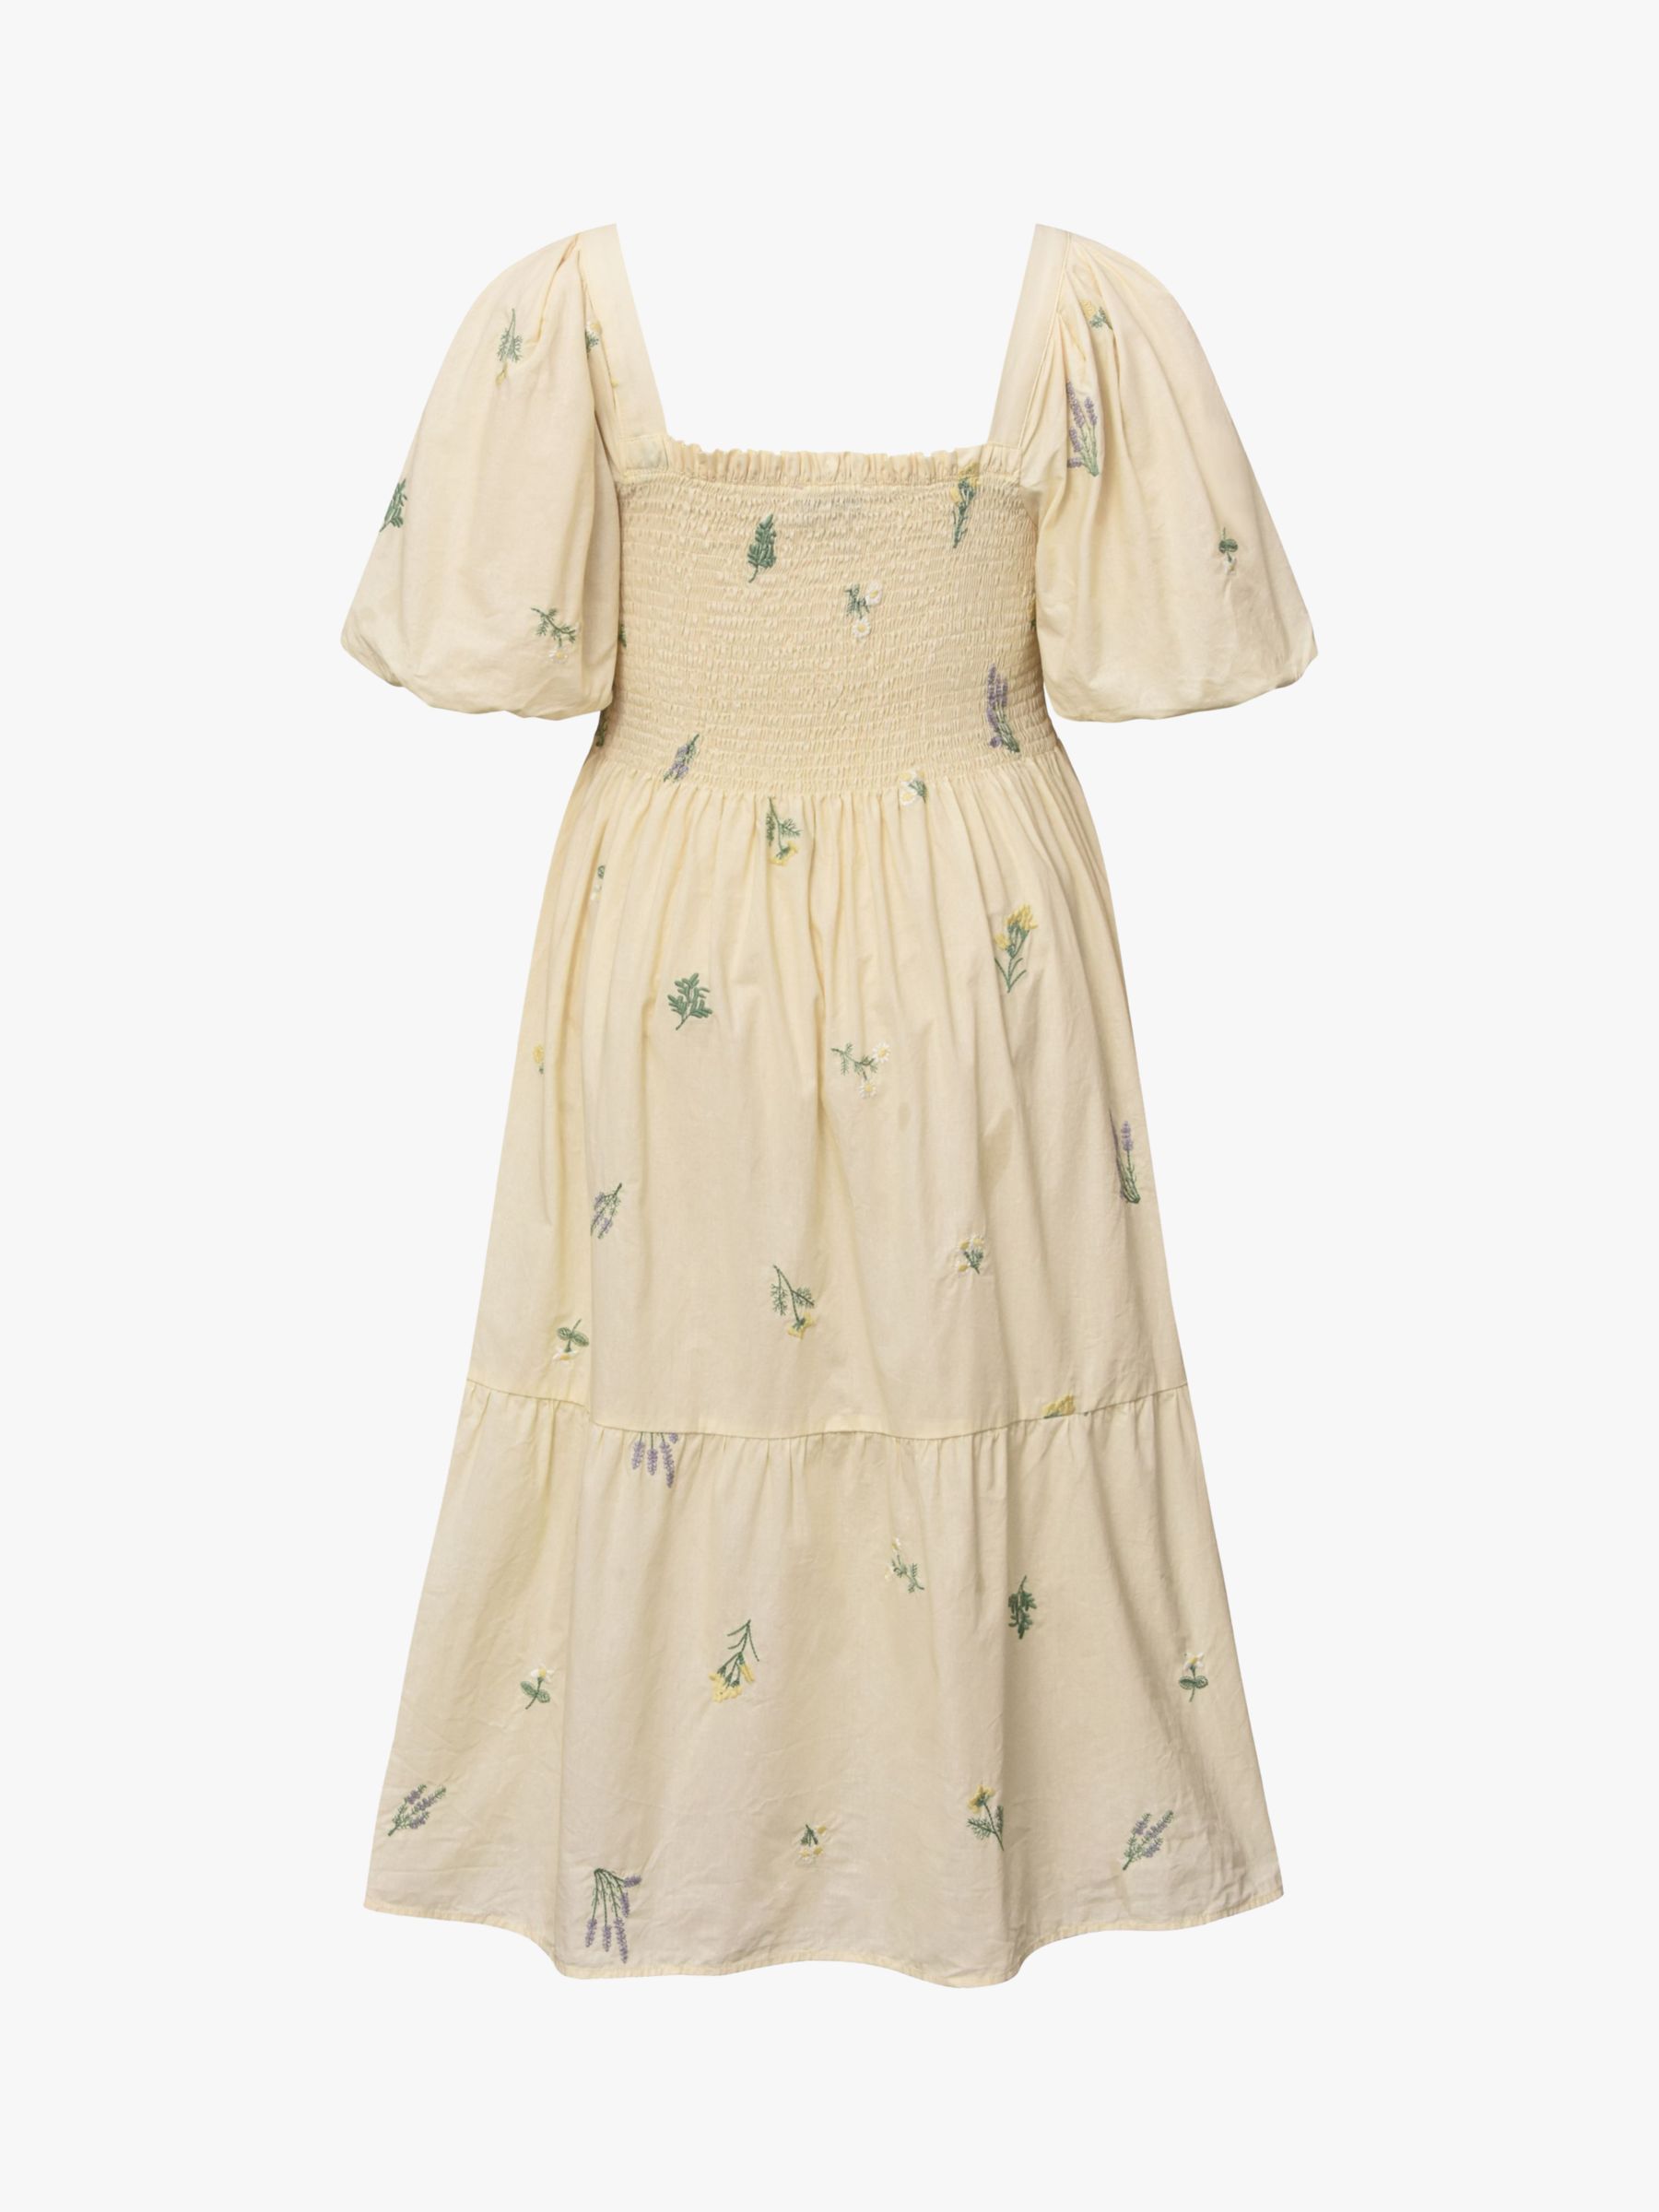 Buy A-VIEW Cheri Floral Midi Dress, Beige/Yellow Online at johnlewis.com